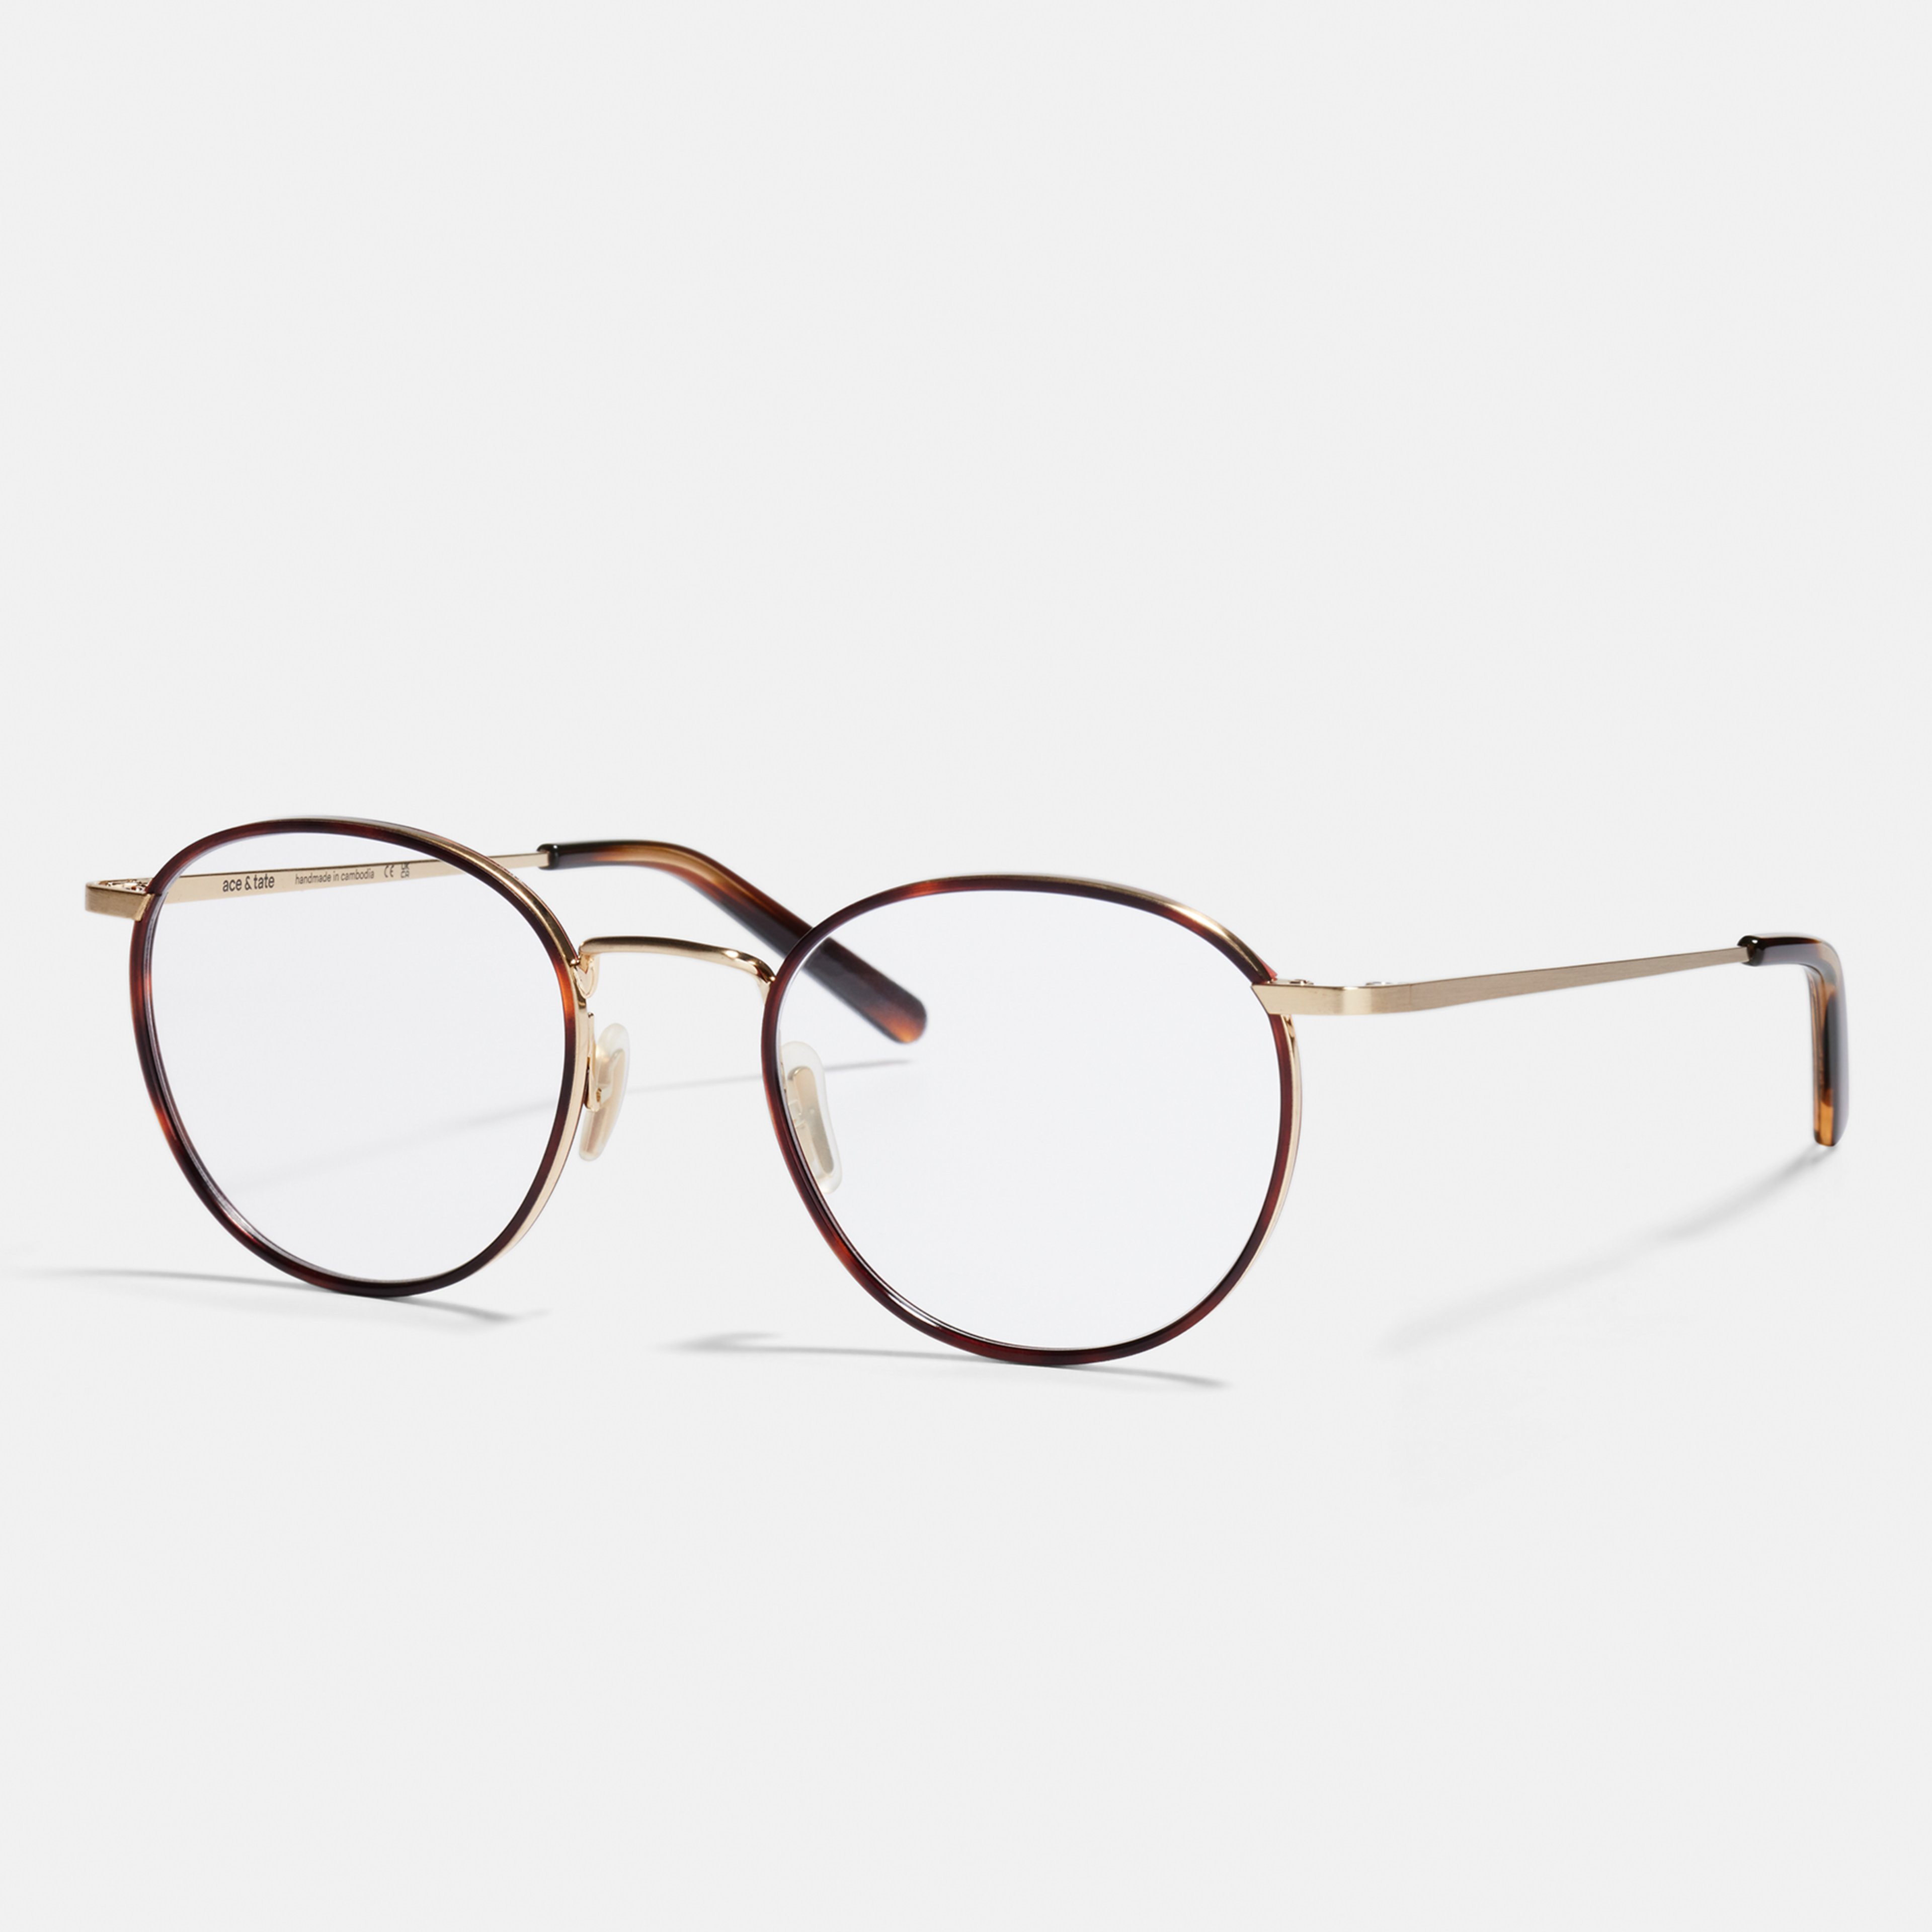 Ace & Tate Glasses | Round Metal in Brown, multicolor, tortoise, Yellow